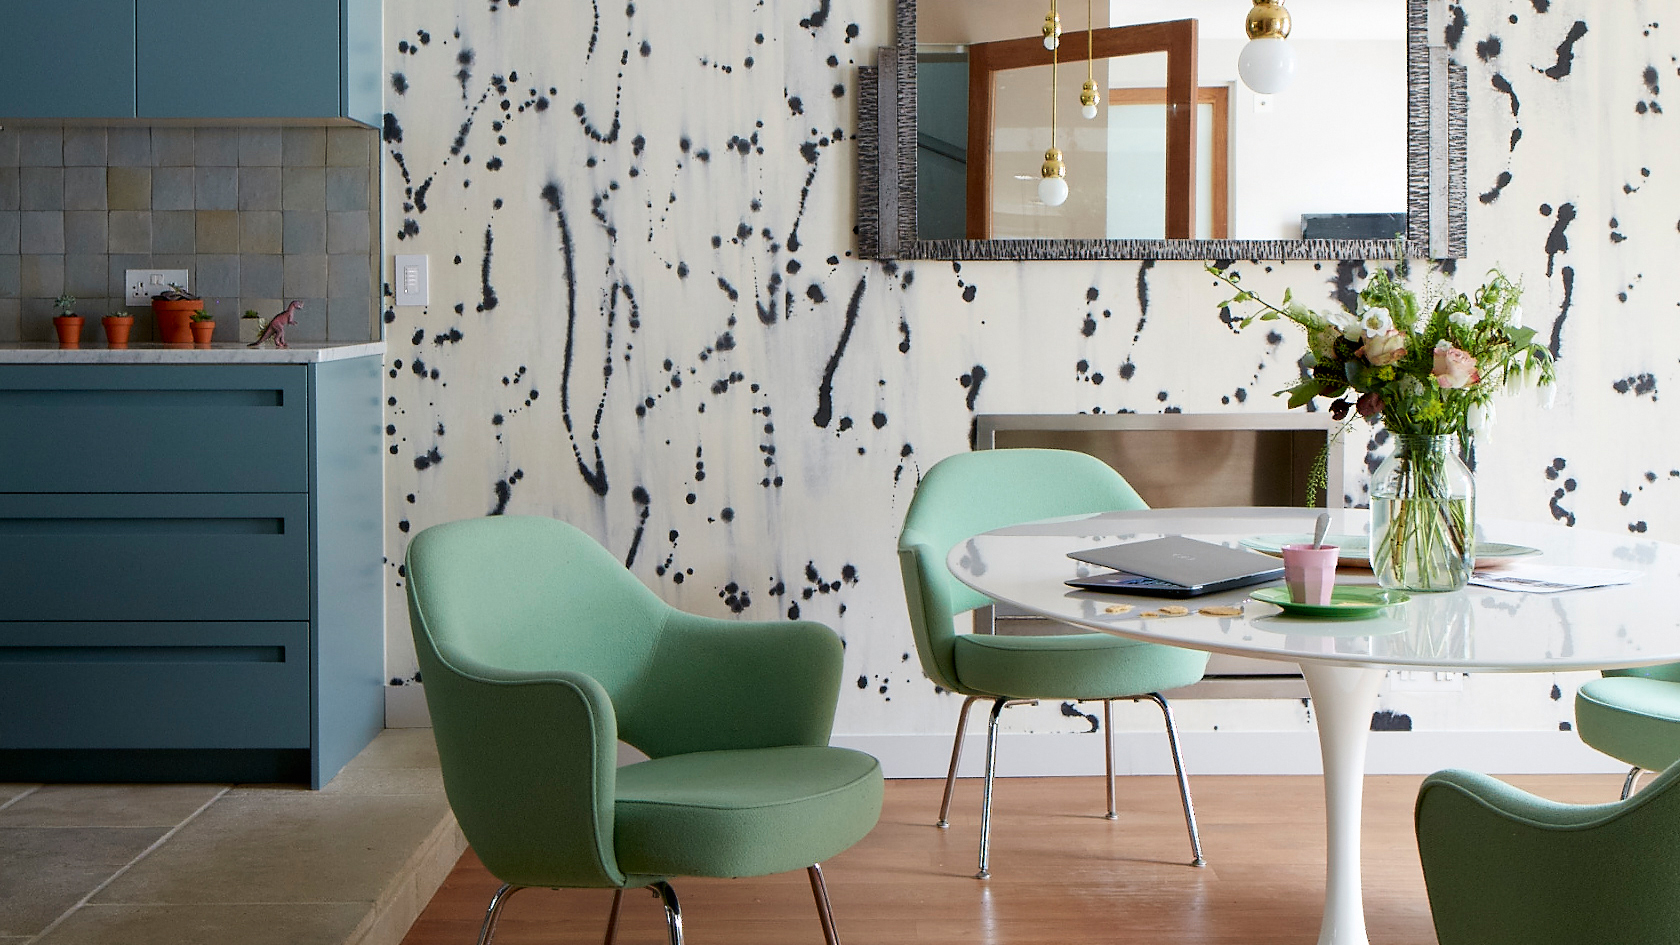 10 dining room wallpaper ideas – modern murals, quirky prints and subtle  styles tp update your space |